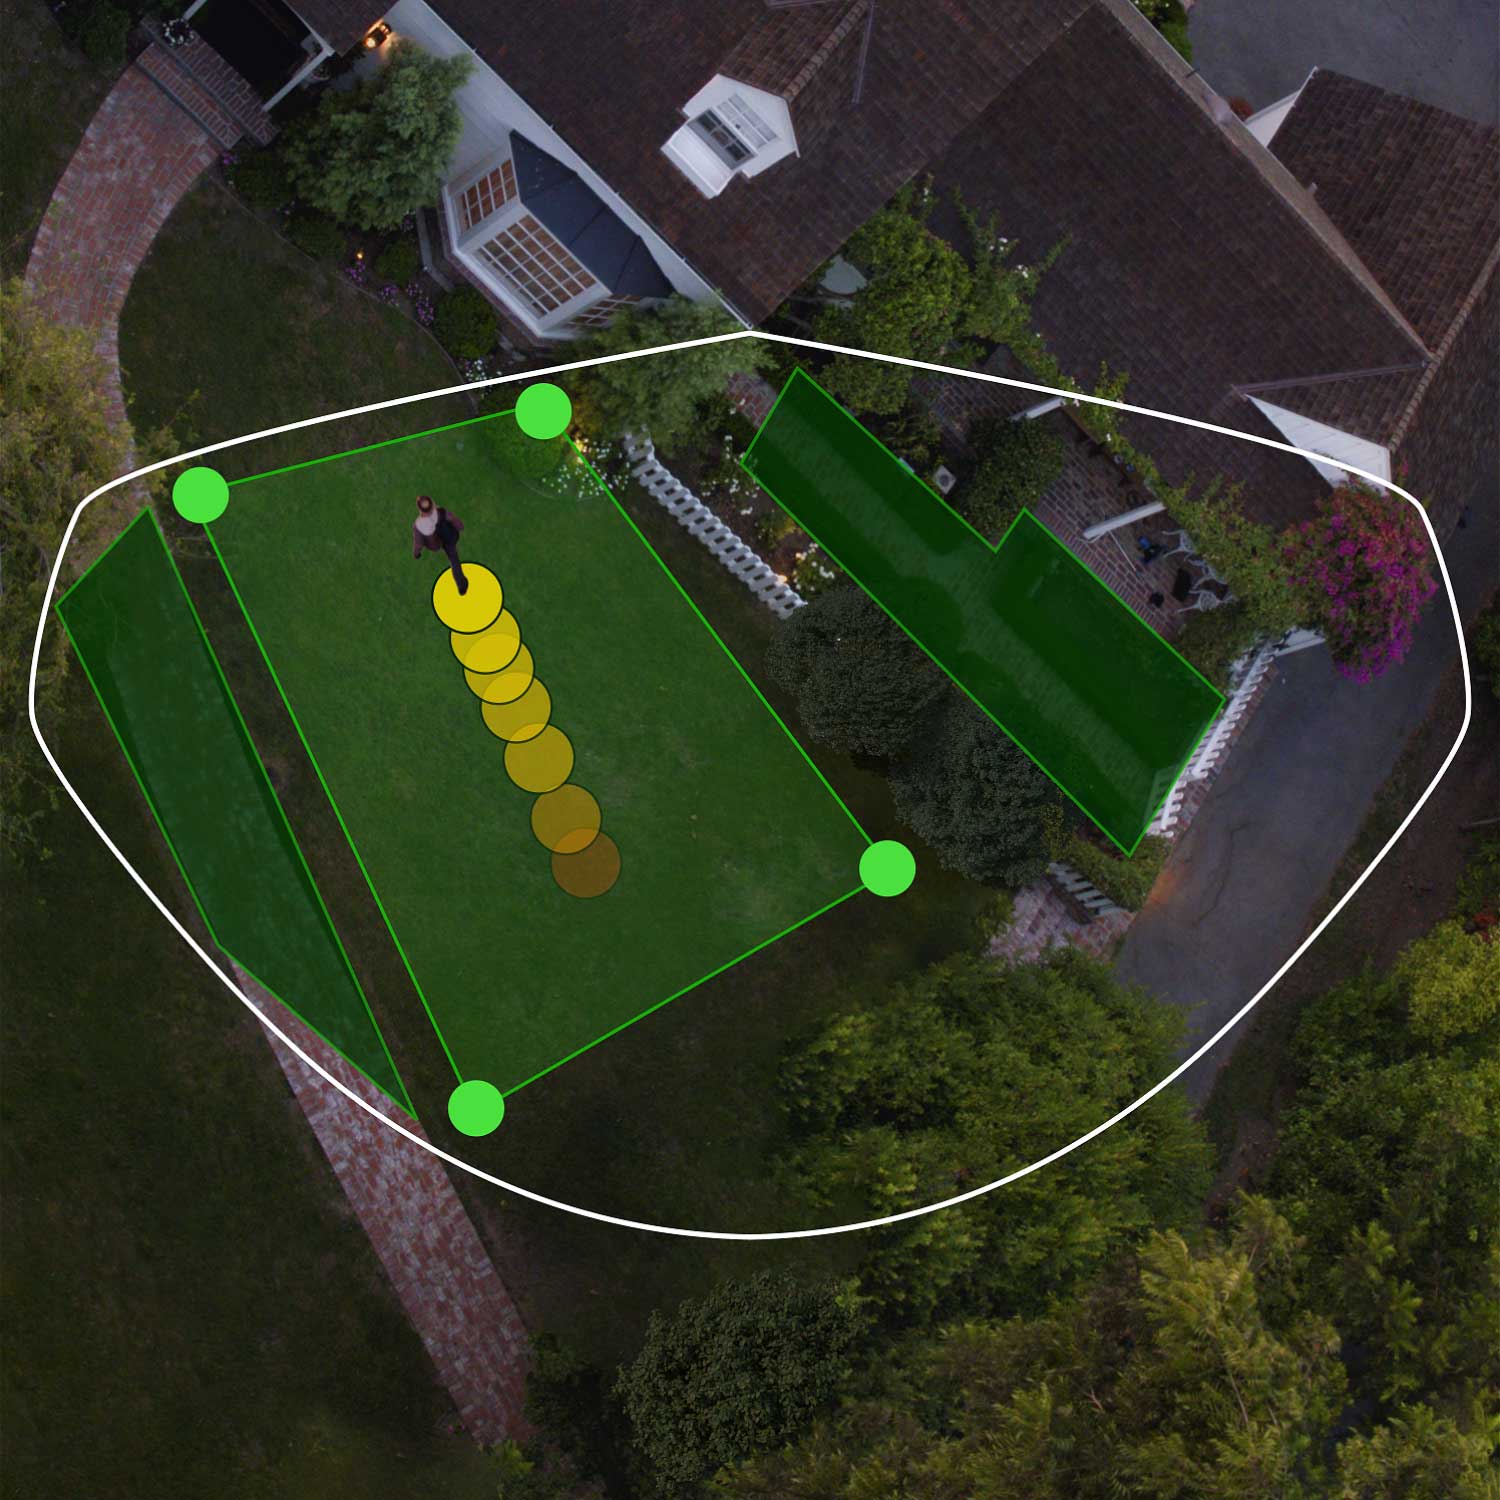 Floodlight Cam Plug-In Pro - Aerial view of front of house showing bird's eye view zones in green. Person walks toward front door, their path indicated by yellow dots.